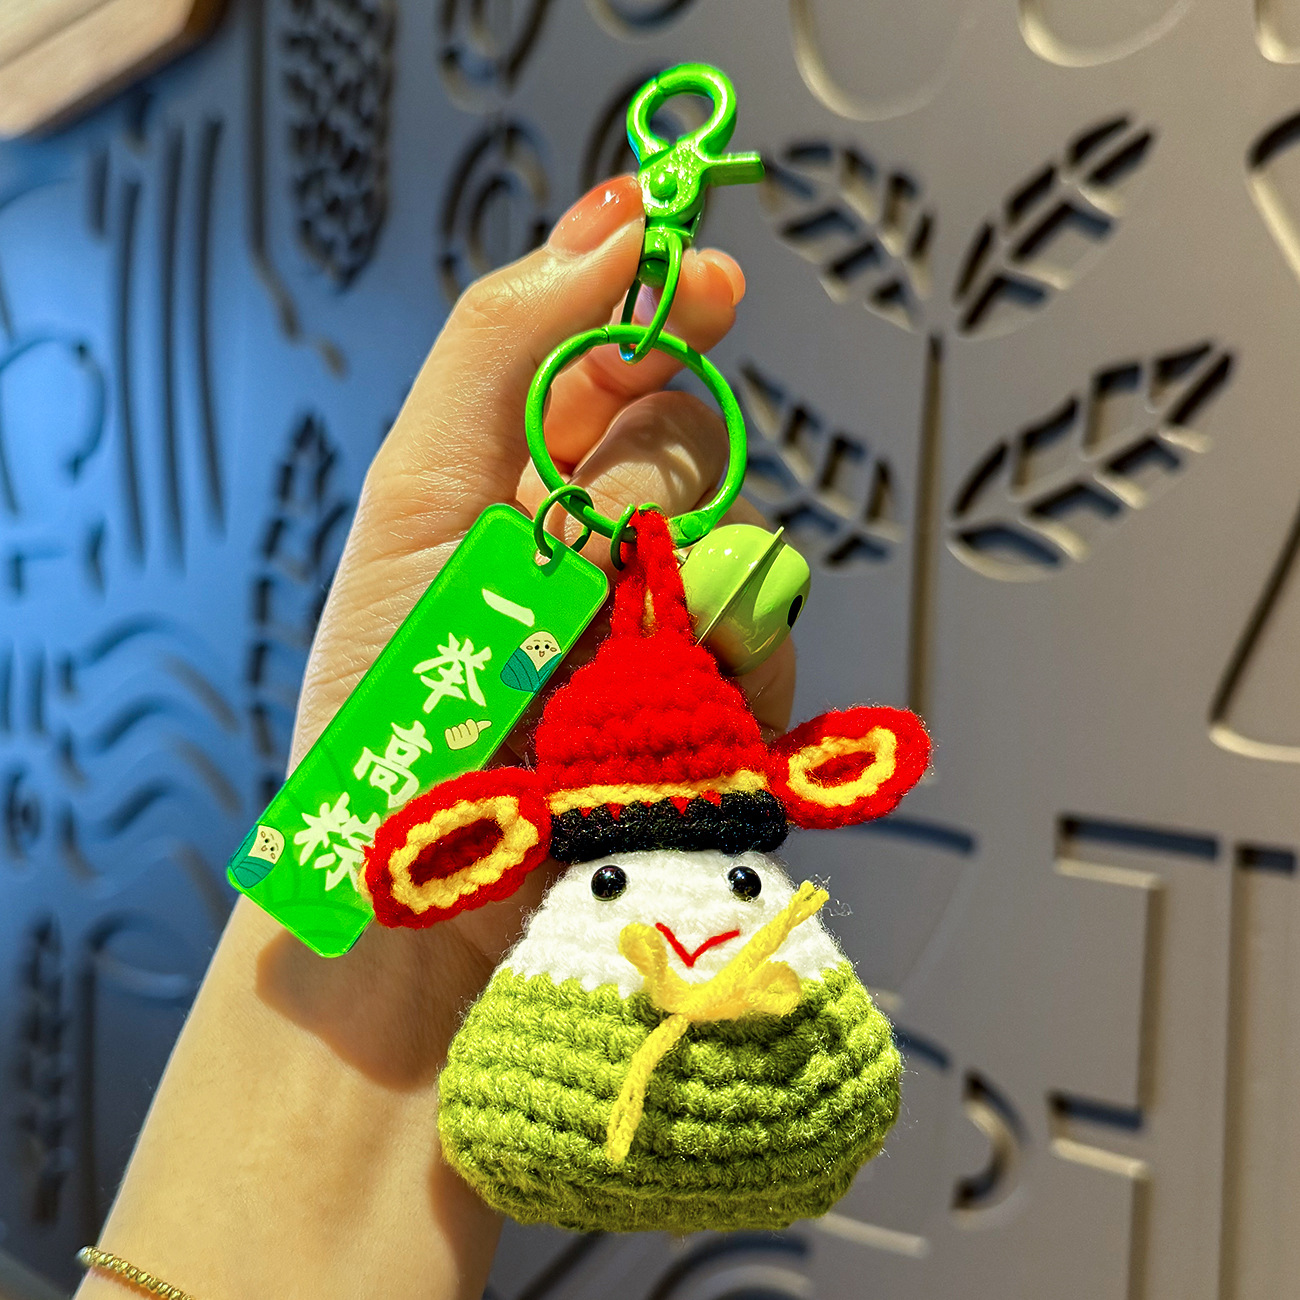 plush key chain knitted bags ornaments for winning the championship at one stroke high dragon boat festival pendant graduation gift for college entrance examination